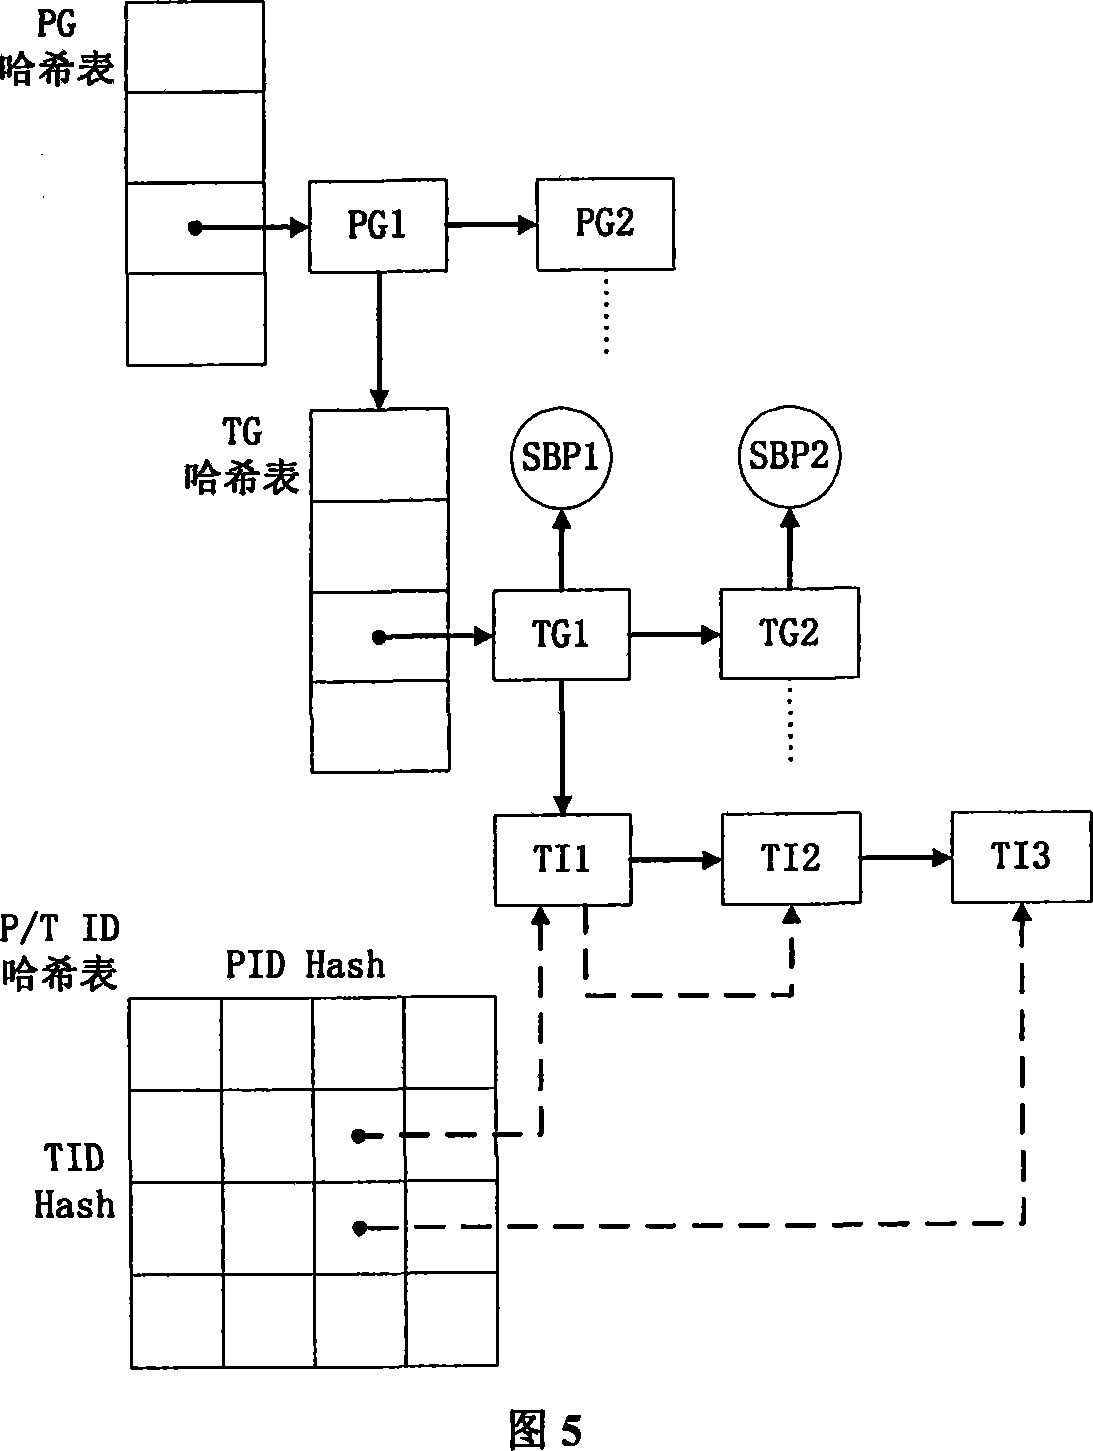 Dynamic power consumption control method for multithread predication by stack depth